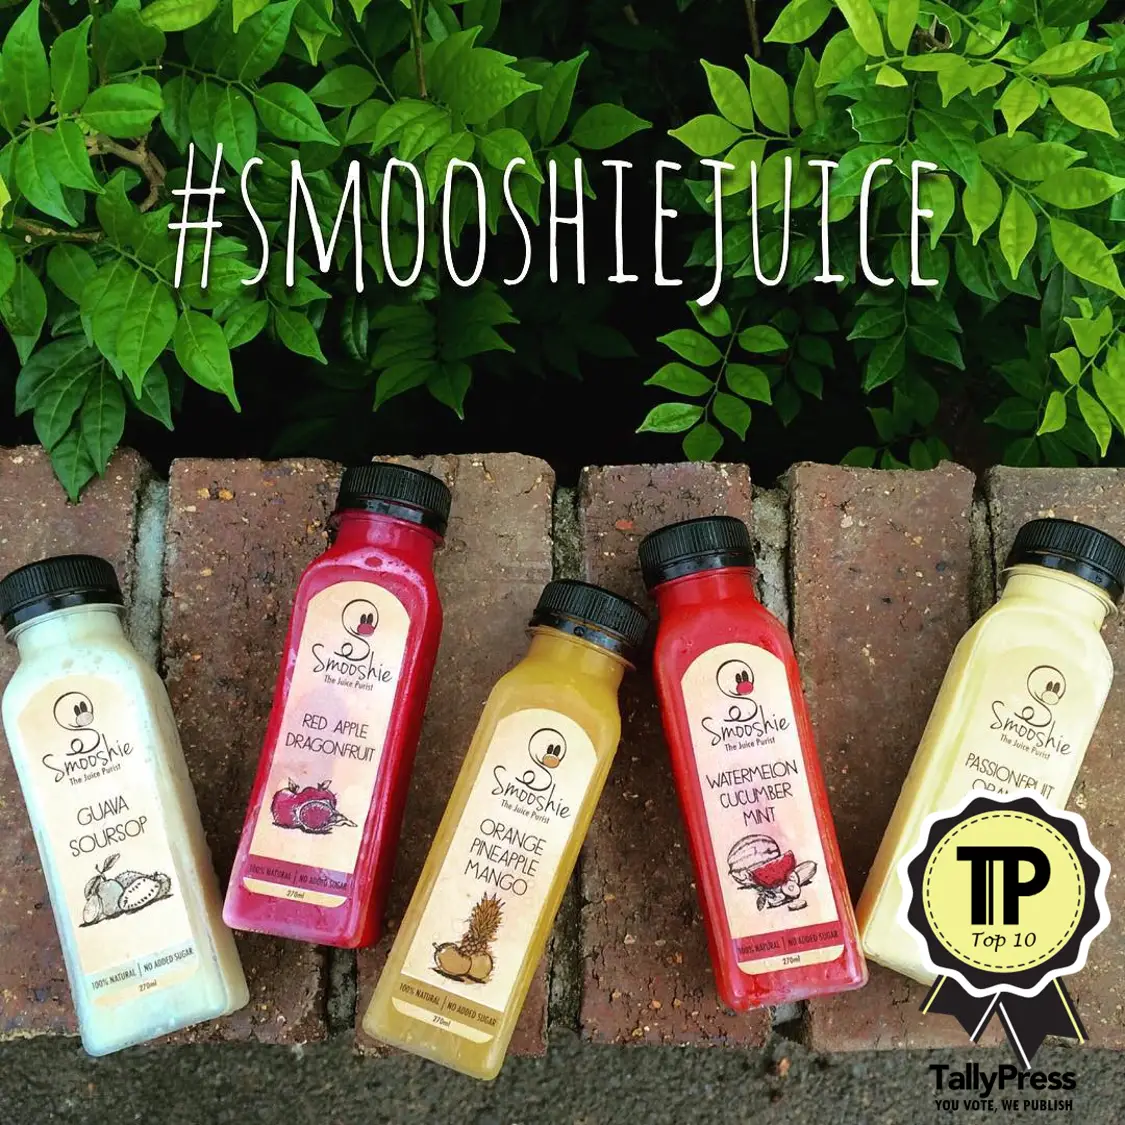 6-smooshie-juice-top-10-best-cold-pressed-juices-in-malaysia-jpg